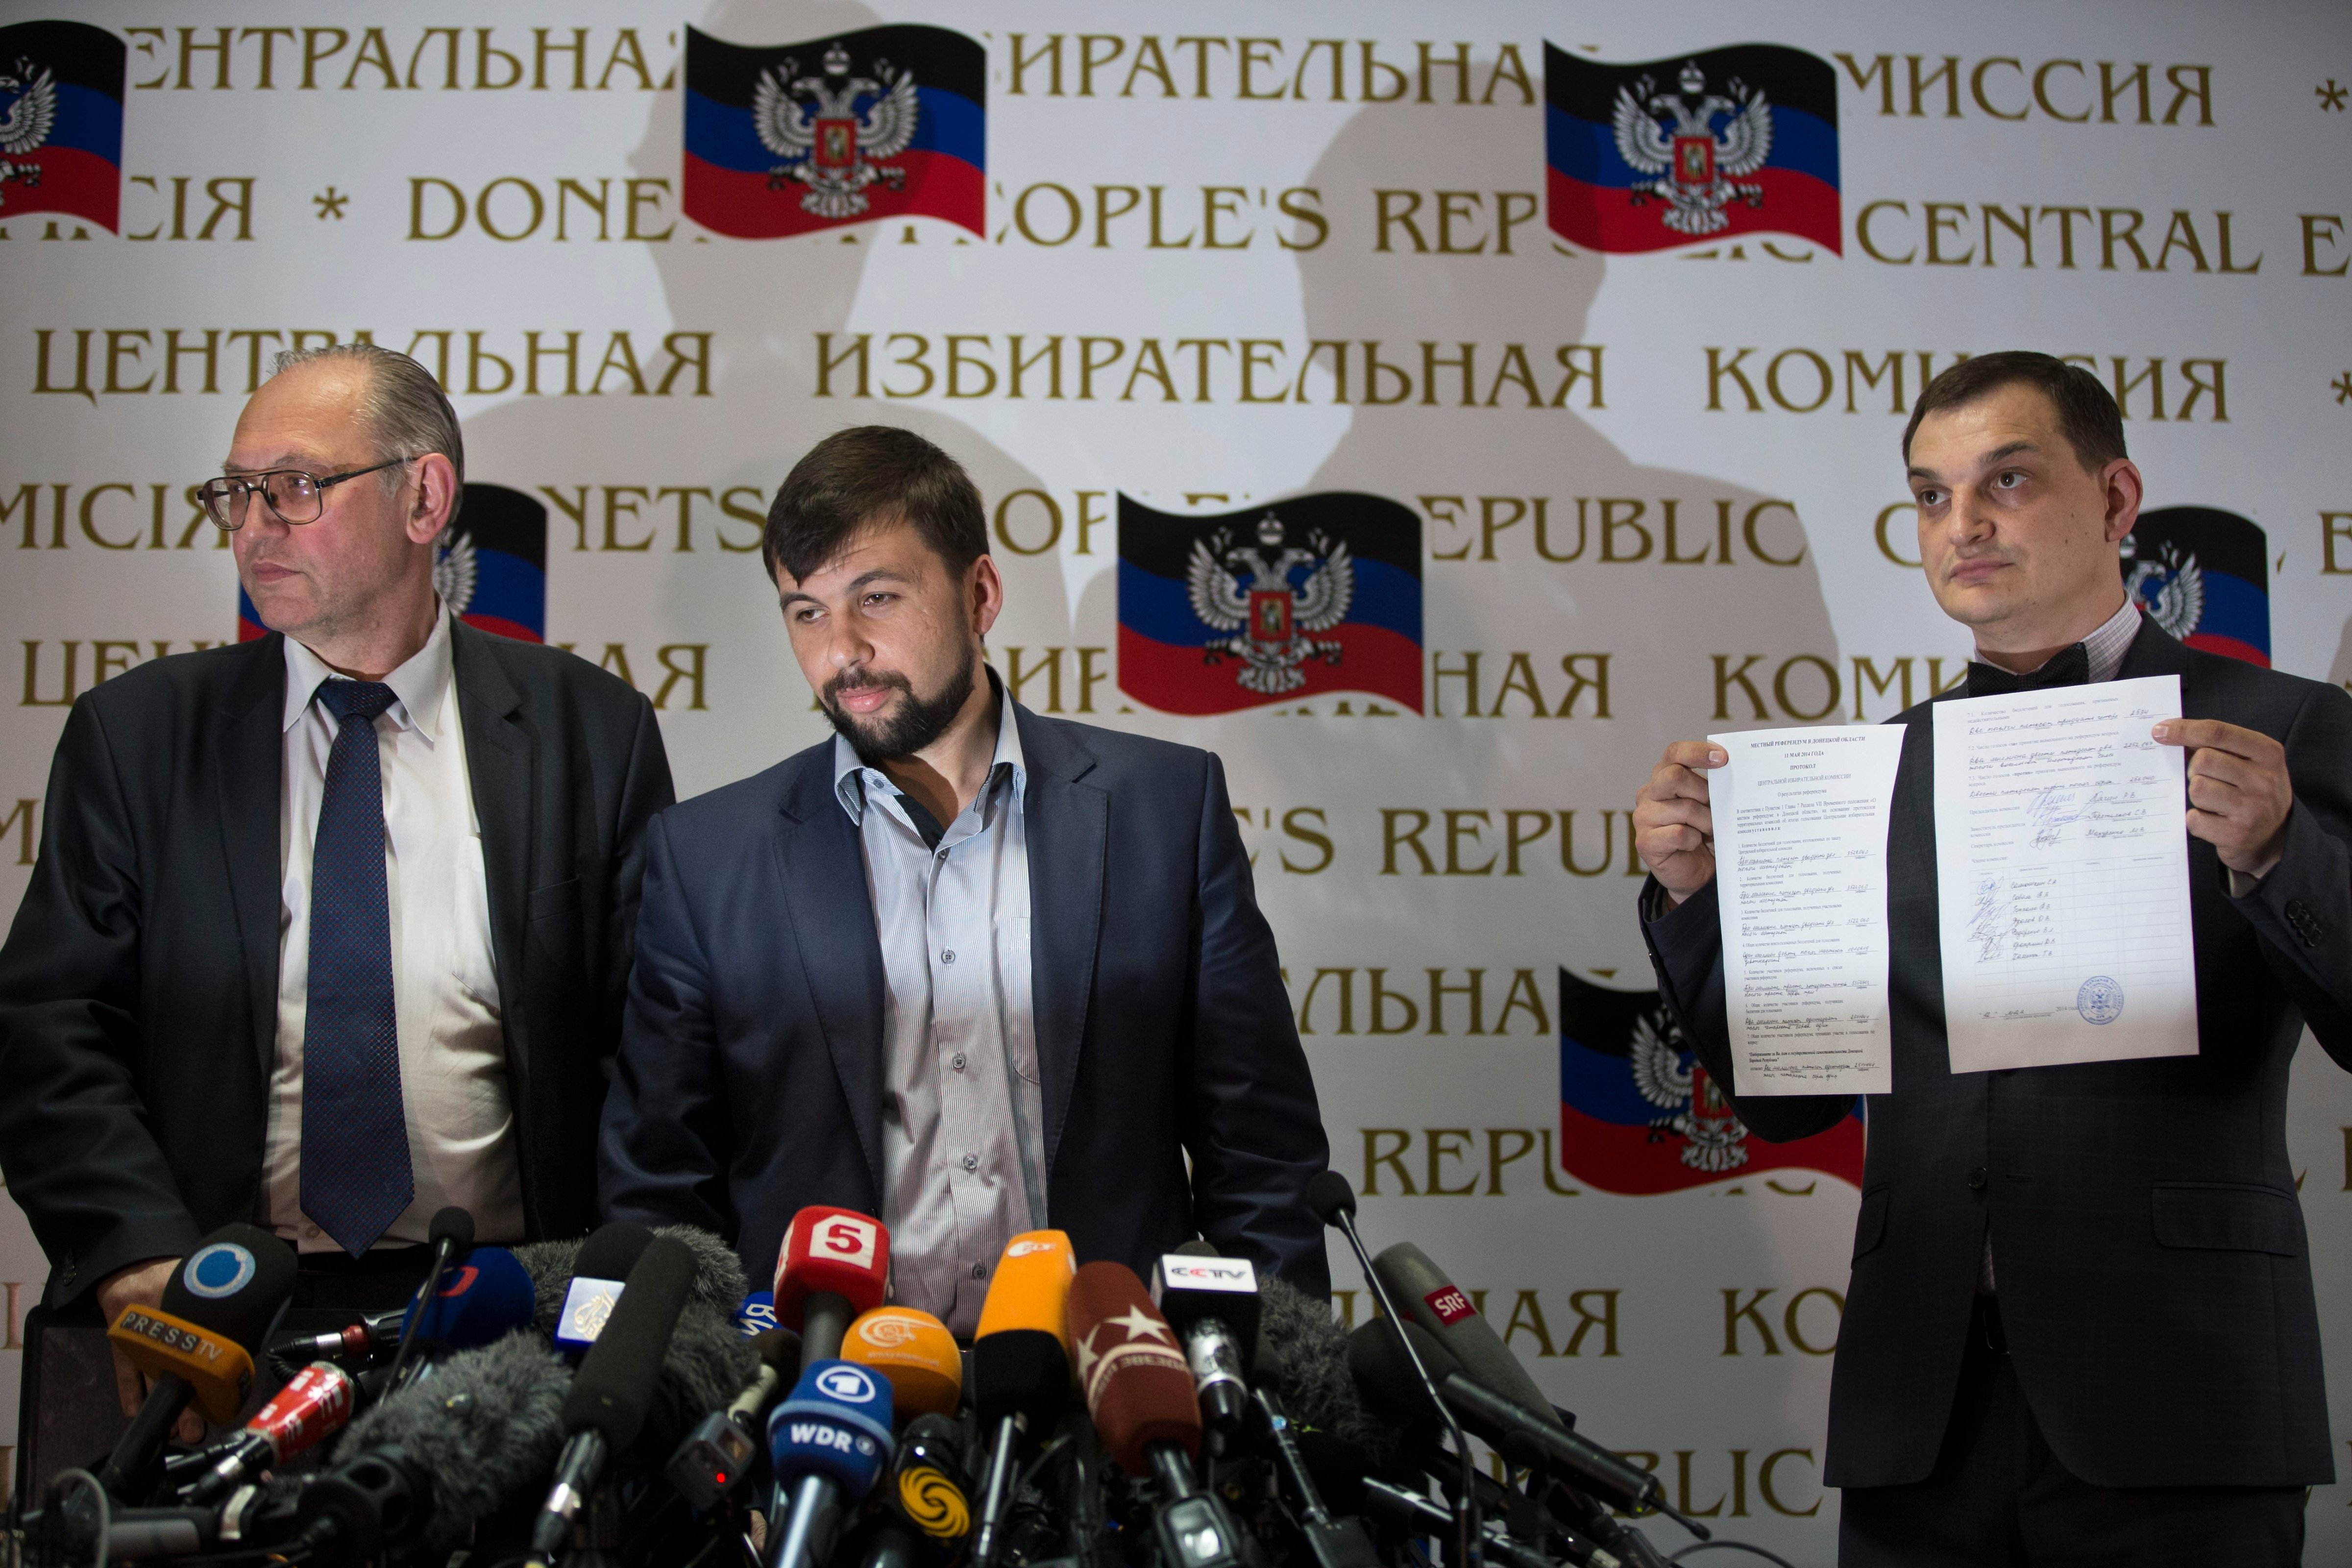 Co-chairman of the Presidium of the People's Republic of Donetsk Boris Litvinov, left, Insurgent leader head of the elections commission of the so-called Donetsk People's Republic Denis Pushilin, and vote-counter Roman Lyagin, right, show documents with the results of Sunday's referendum at a news conference in Donetsk, May 12, 2014. (Alexander Zemlianichenko—AP)